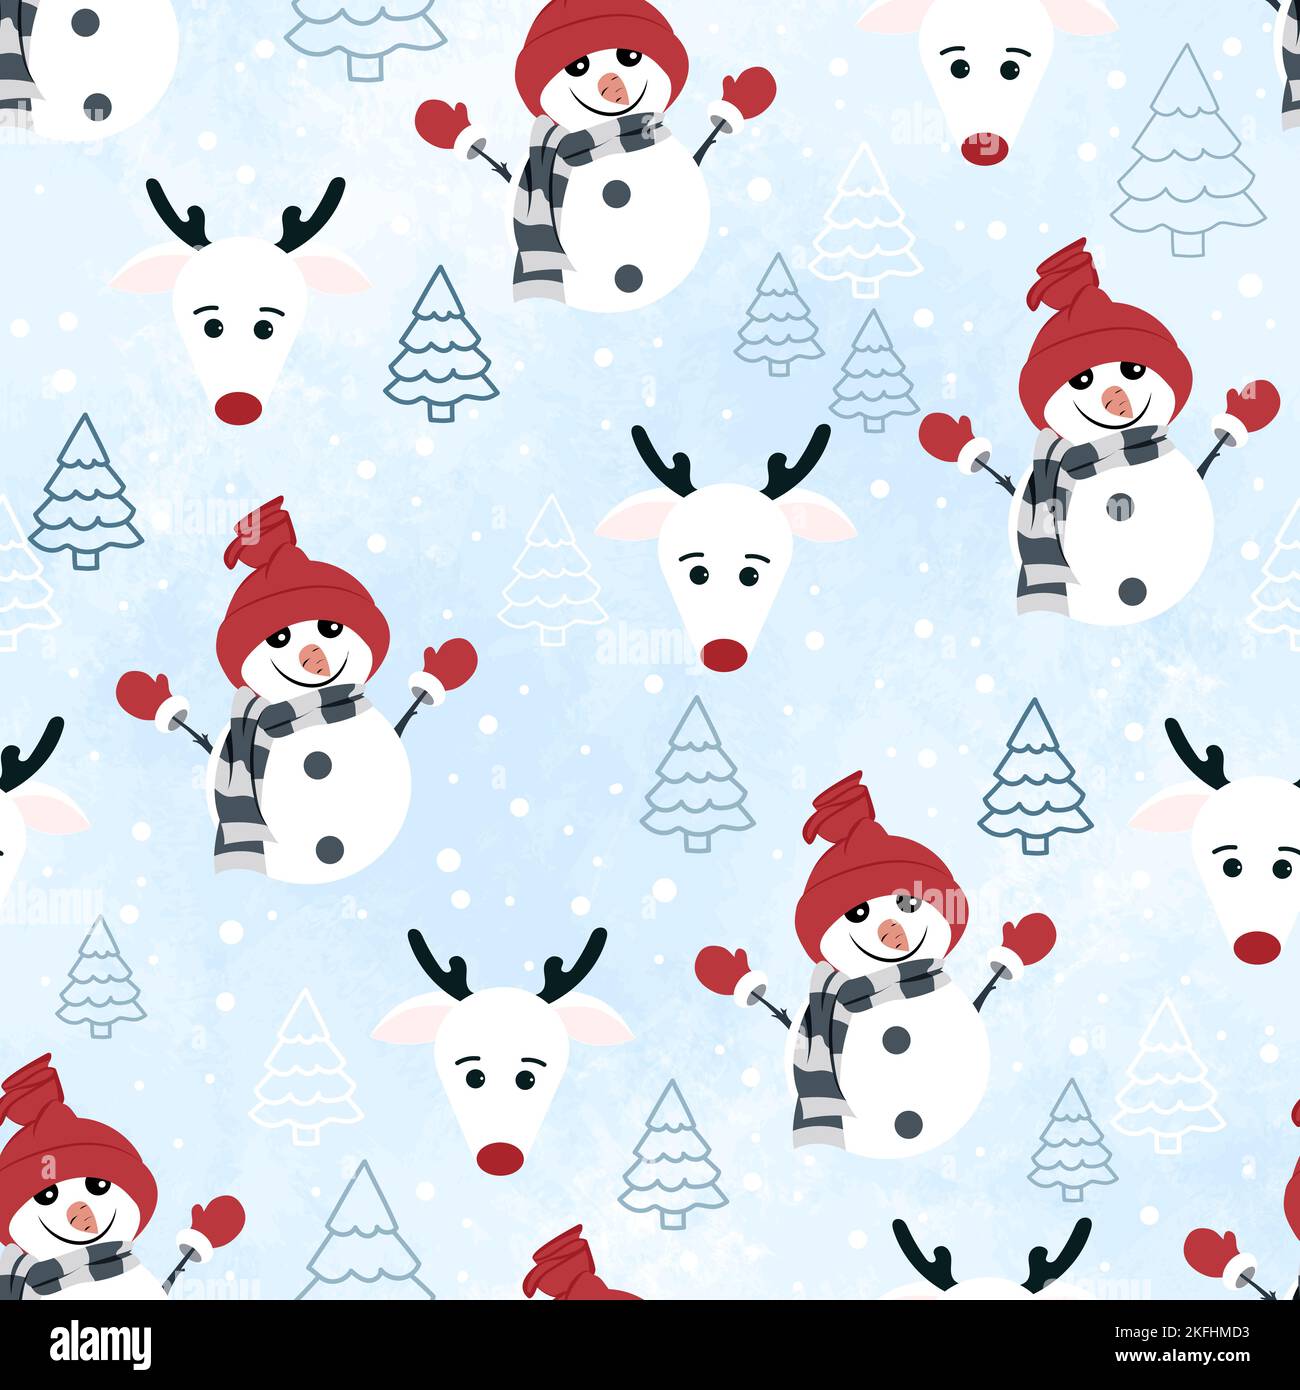 Funny snowmen in red hats and reindeer on a winter watercolor background. Christmas seamless pattern for wrapping paper and greeting cards. Stock Vector